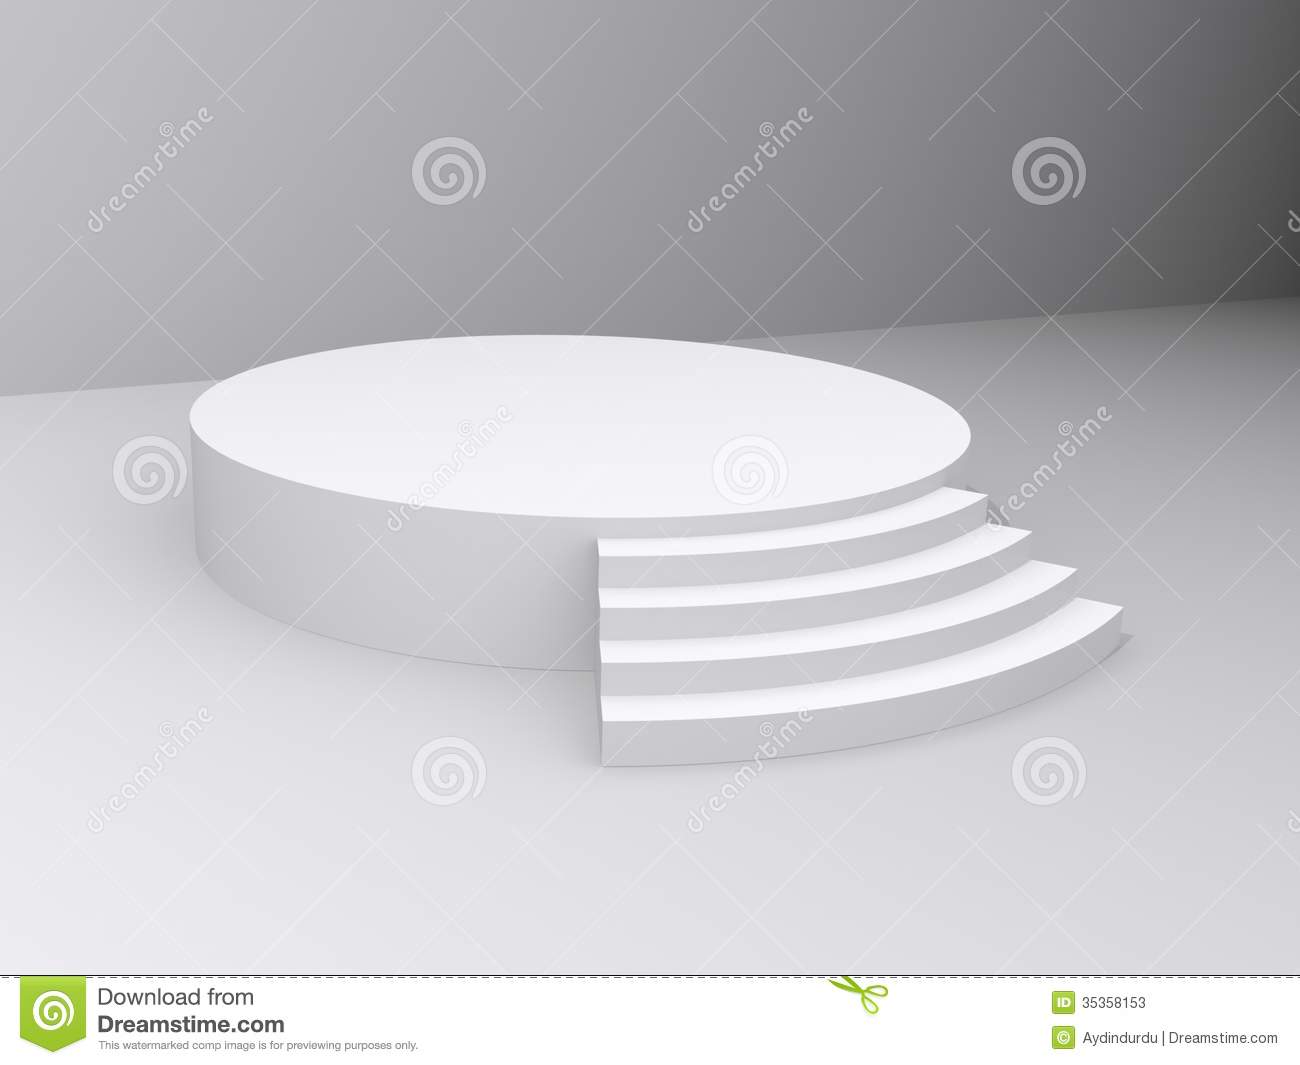 Round White Illustrated Platform Or Stage With Steps In A Simple